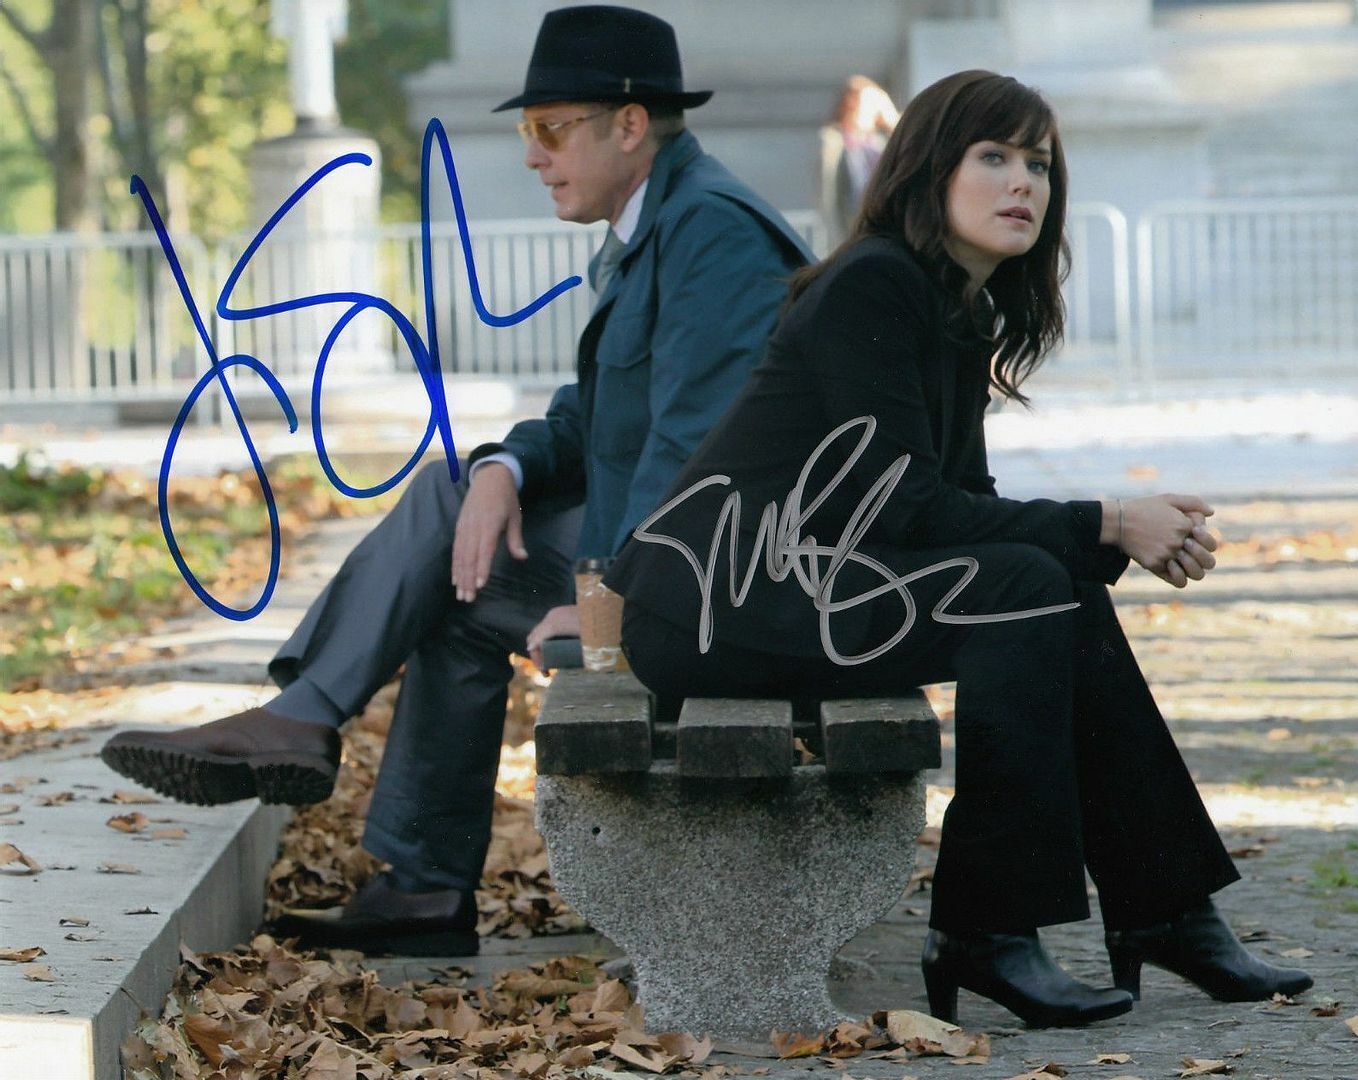 James Spader & Megan Boone - The Blacklist Autograph Signed Photo Poster painting Print